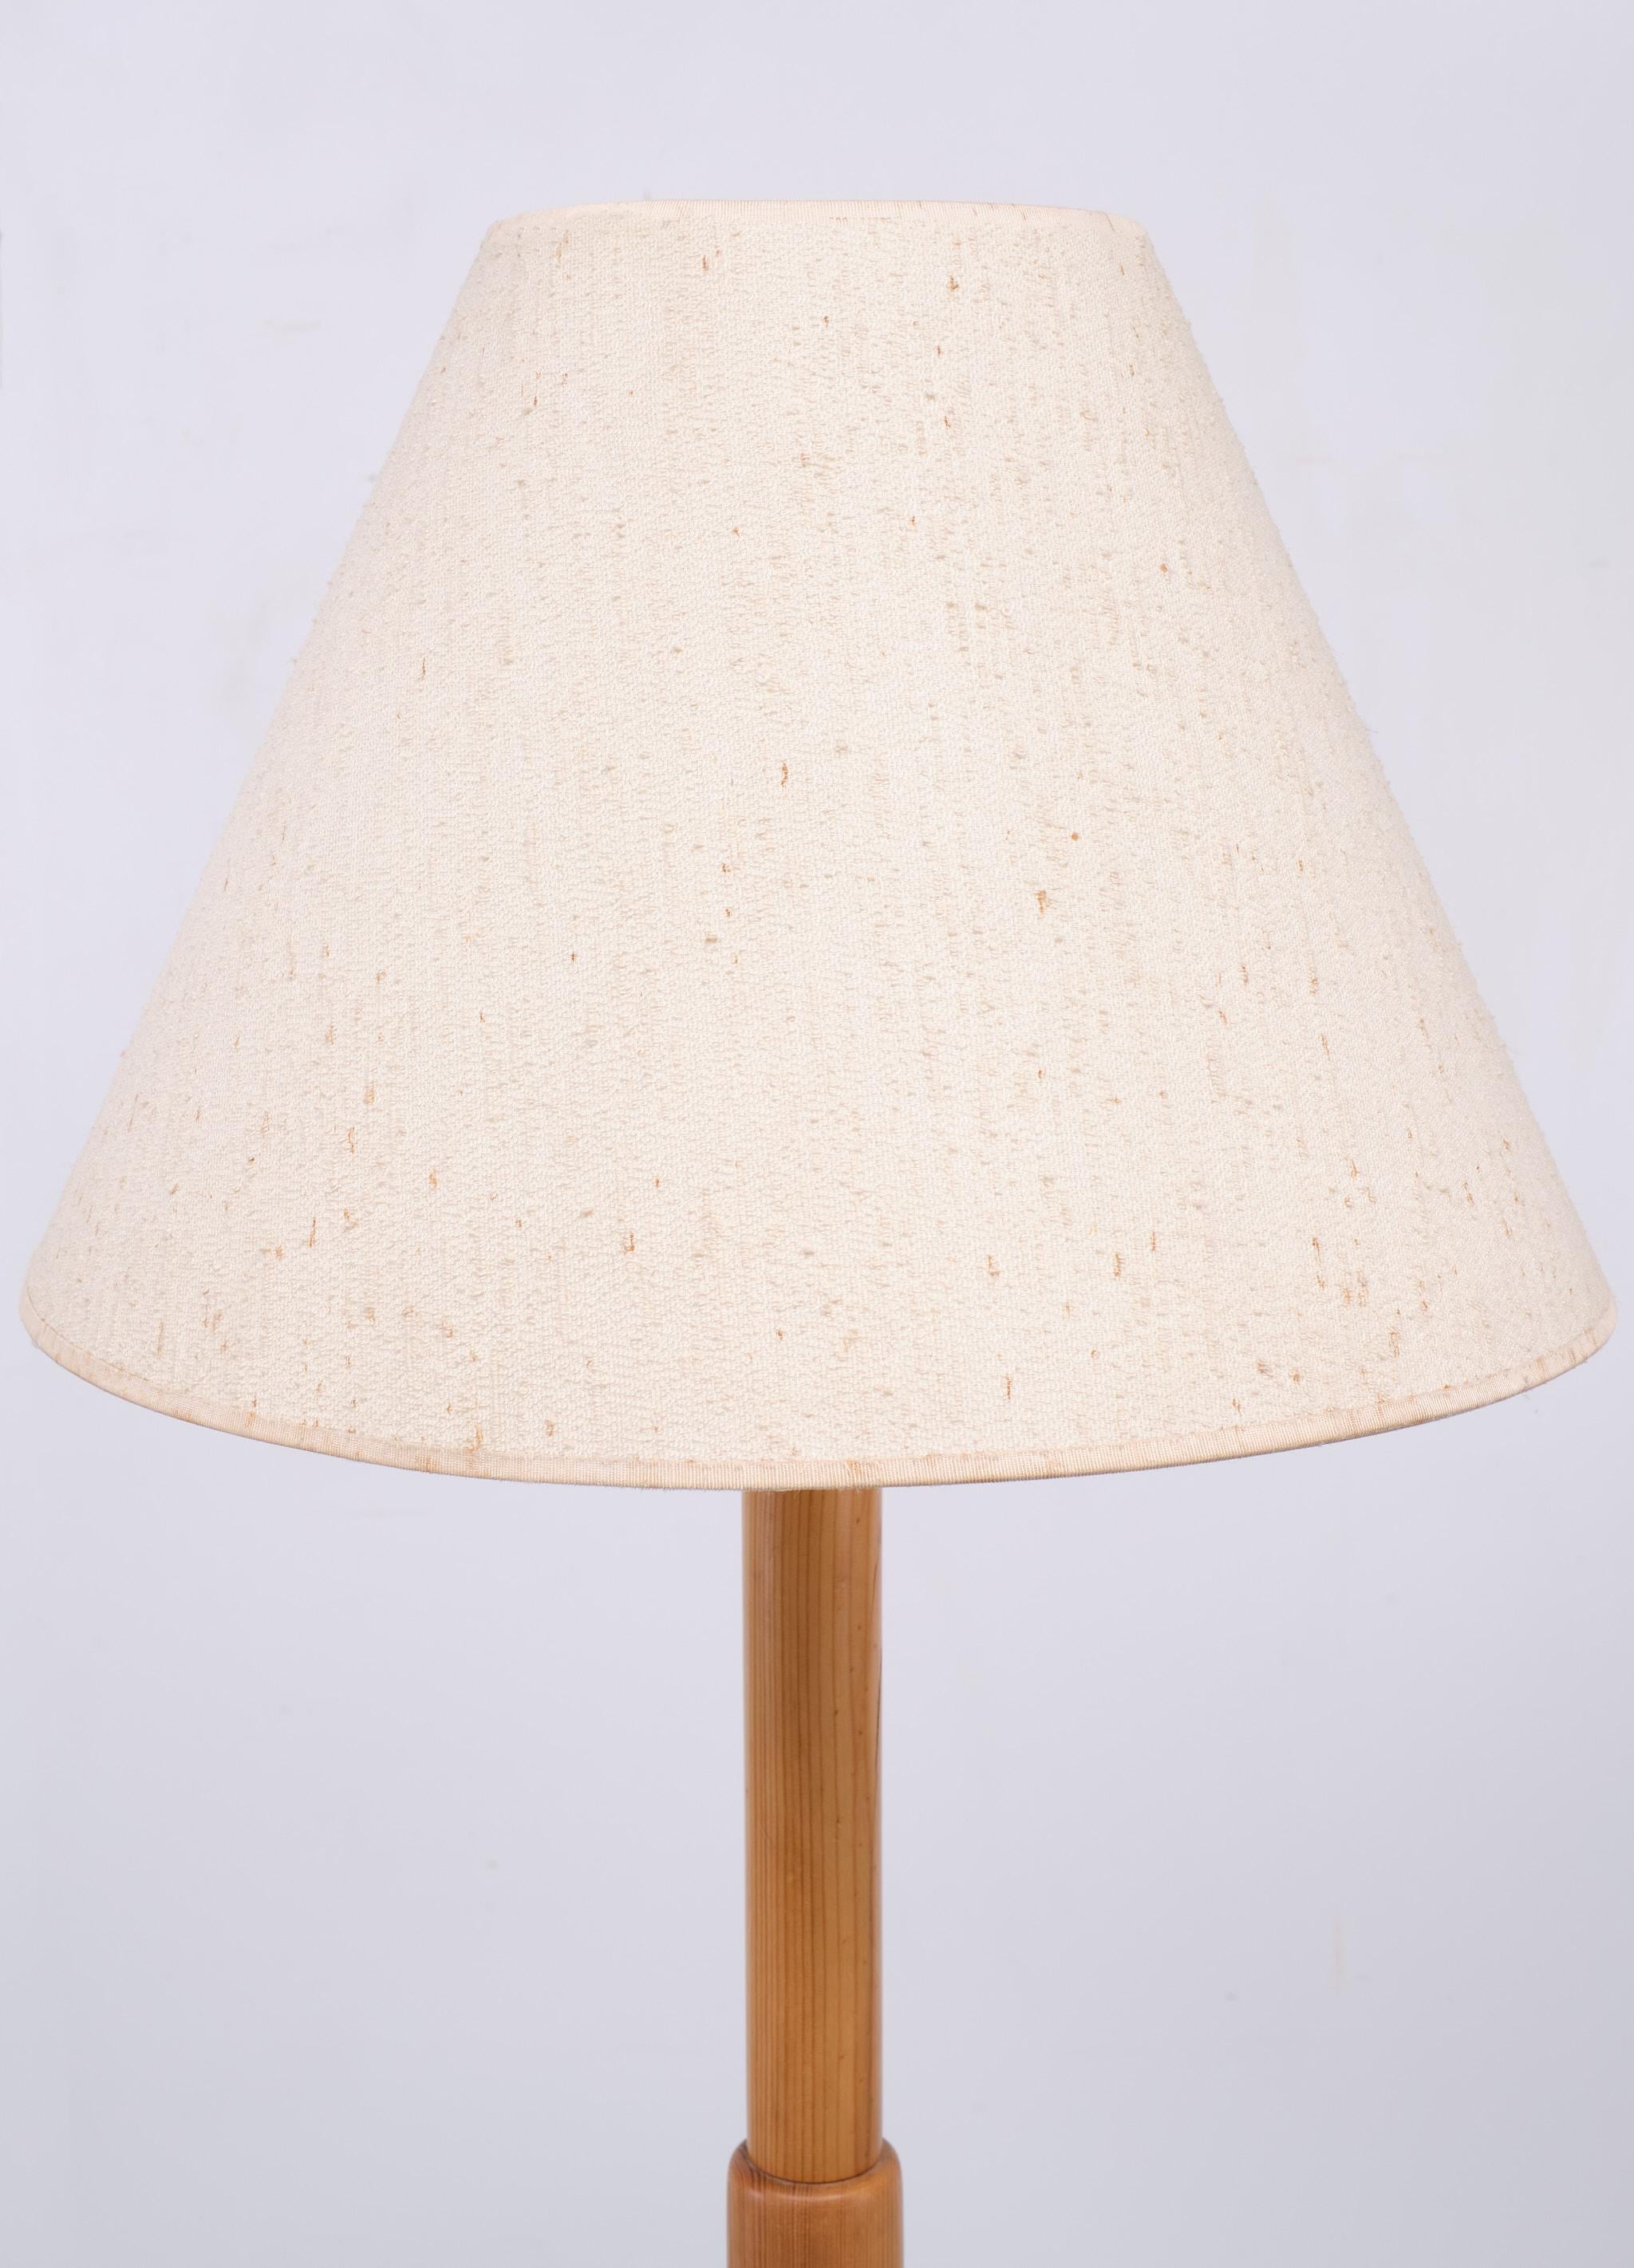 Very nice floor lamp . Solid Pine  ,comes with its original Wood chip shade .Good condition .  .Solbackens Svarveri, sweden 1970s 
One large E27 bulb needed 

Please don't hesitate to reach out for alternative shipping quotes